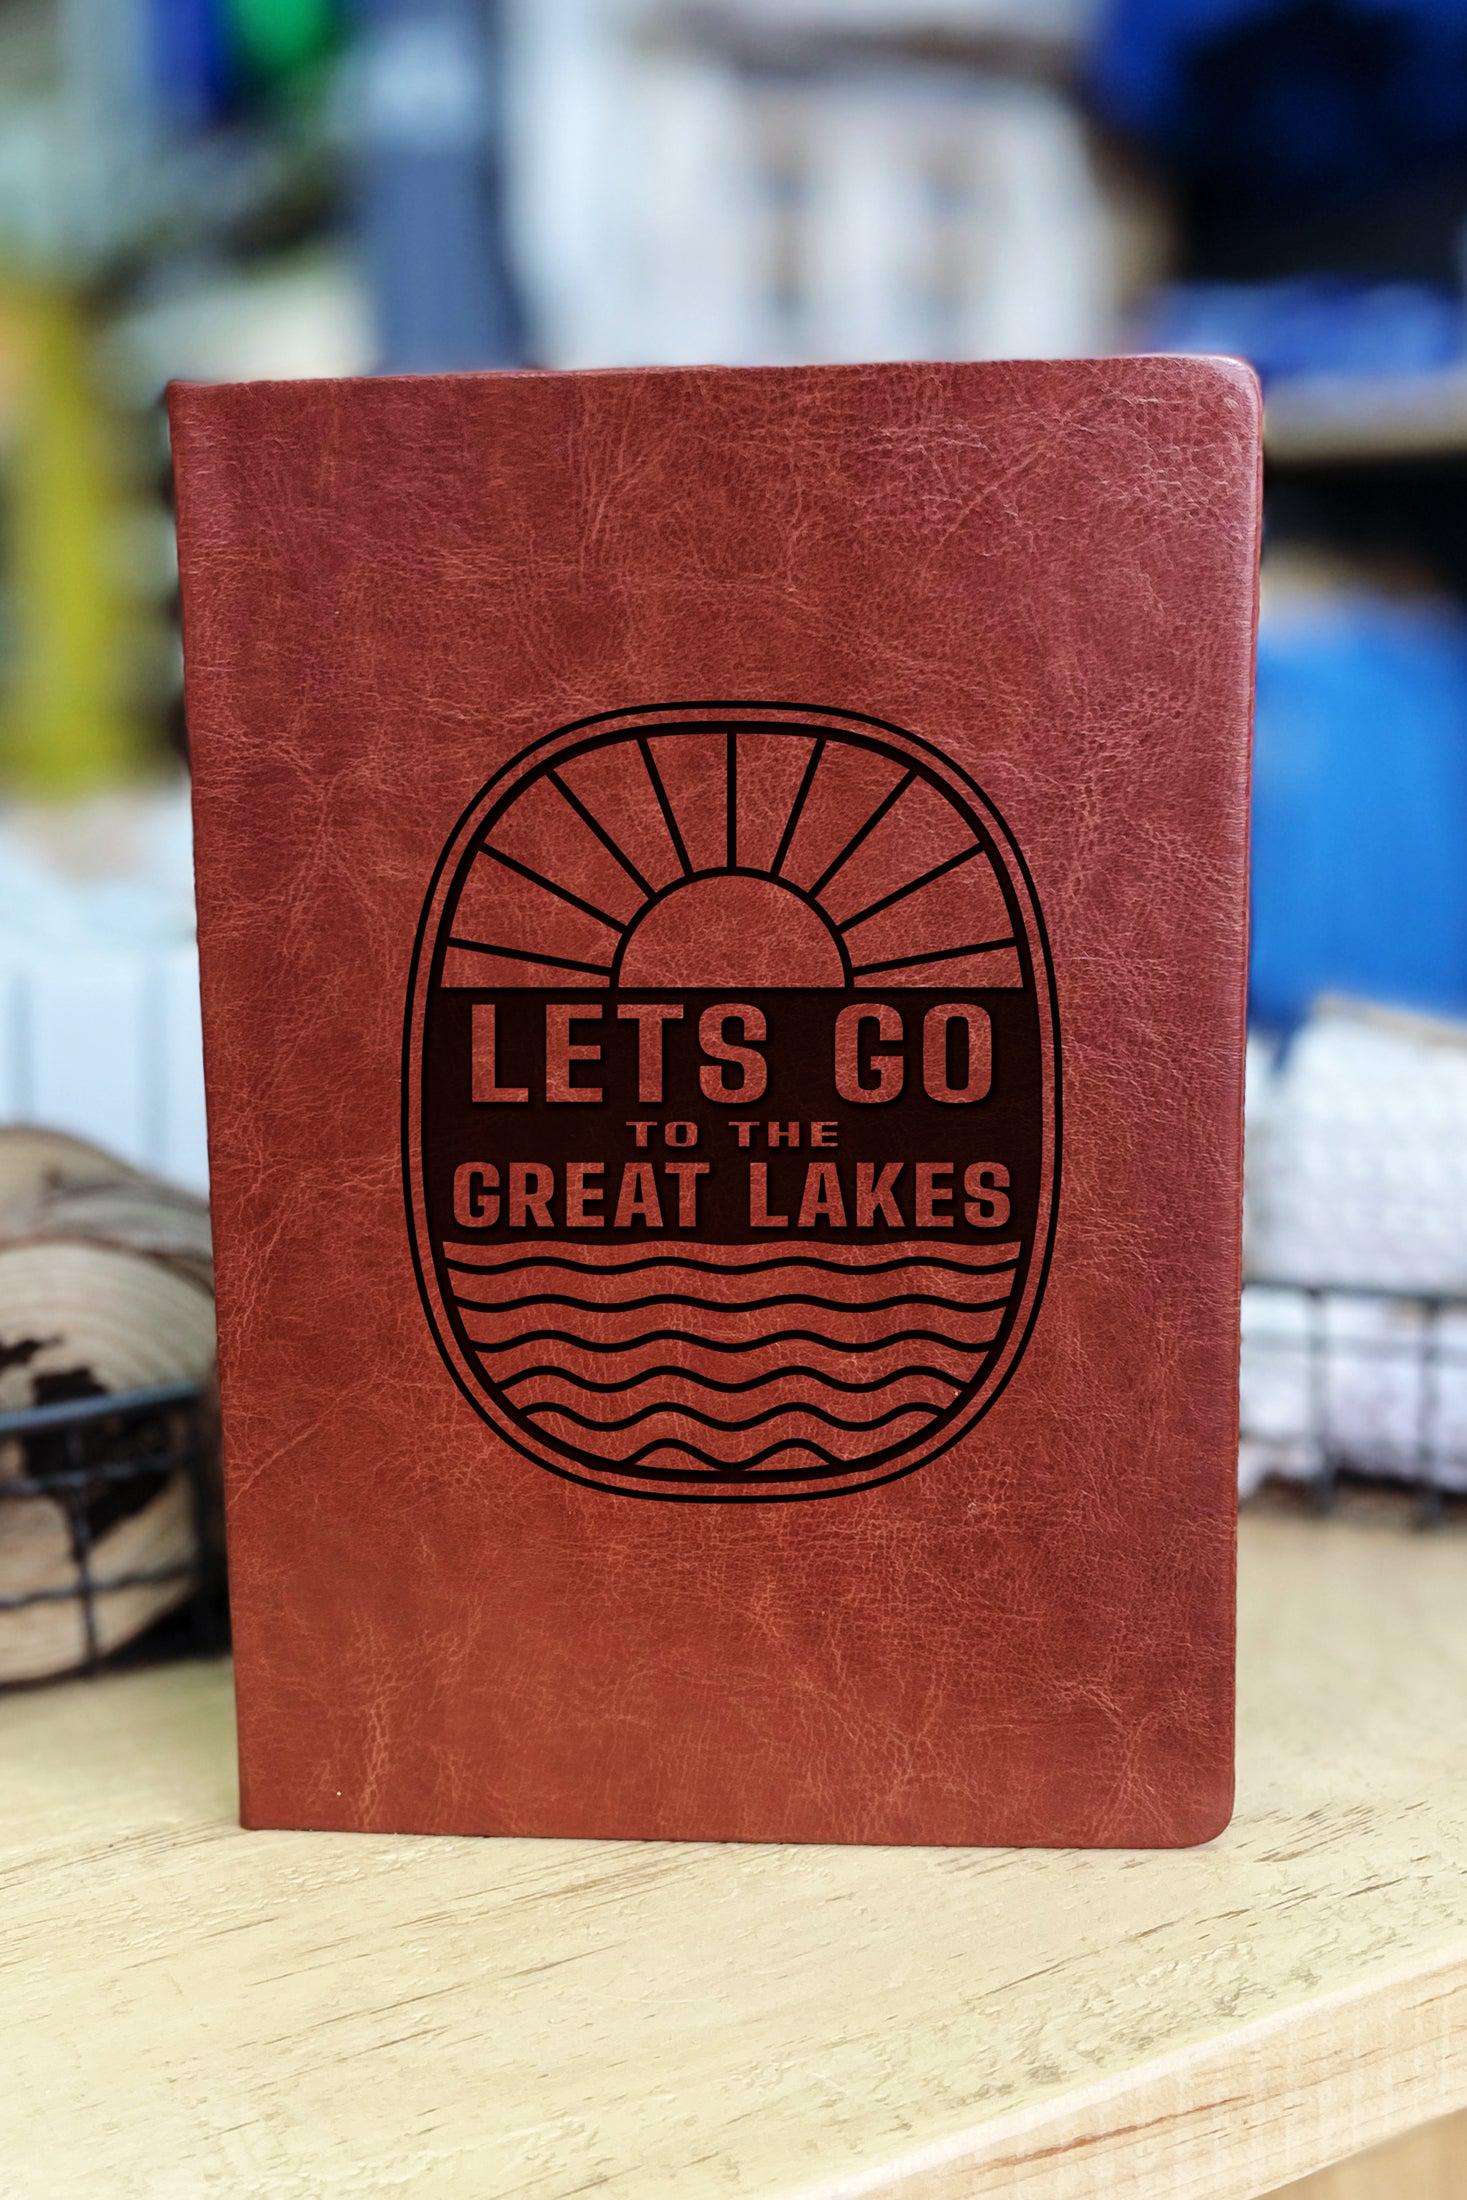 "Lets Go to the Great Lakes" - Badge - Great Lakes - Leather Journal